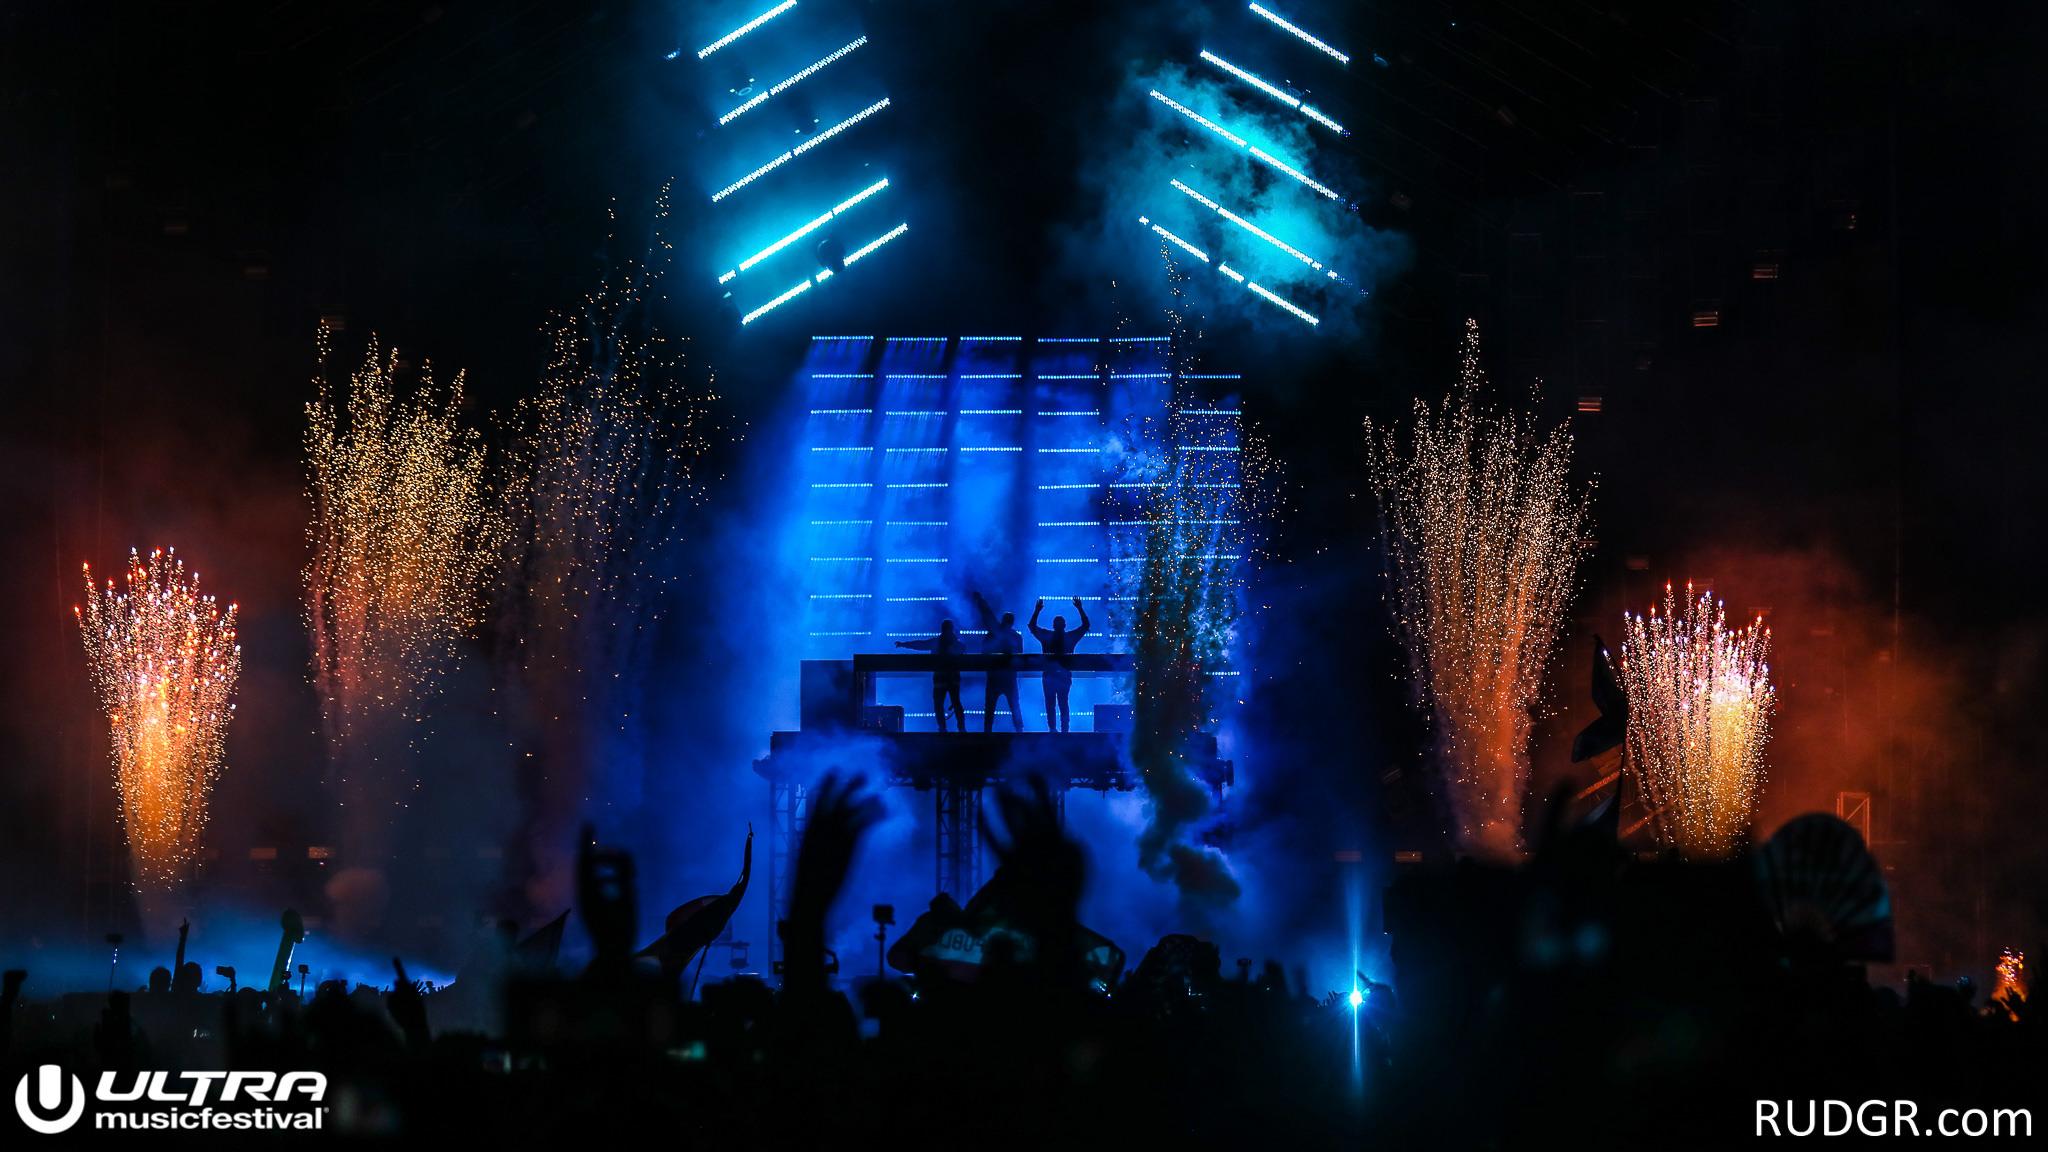 Swedish House Mafia Tour Hype As Posters Appear In